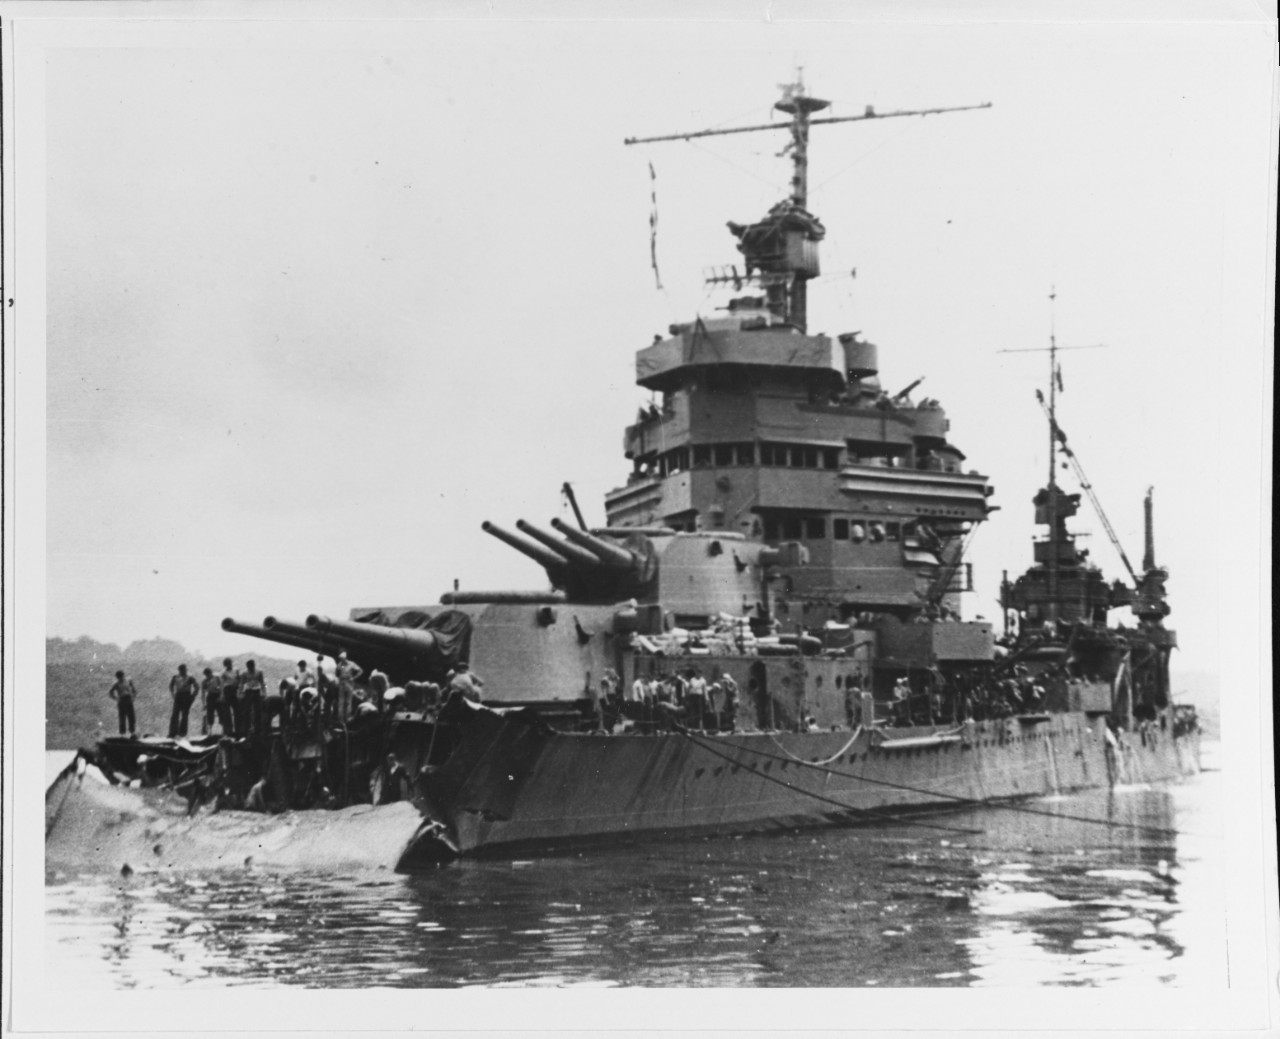 USS Minneapolis (CA-36) at Tulagi with torpedo damage received in the battle. Photograph was taken on 1 December 1942, as work began to cut away the wreckage of her bow. Official U.S. Navy Photograph, now in the collections of the National Archives.